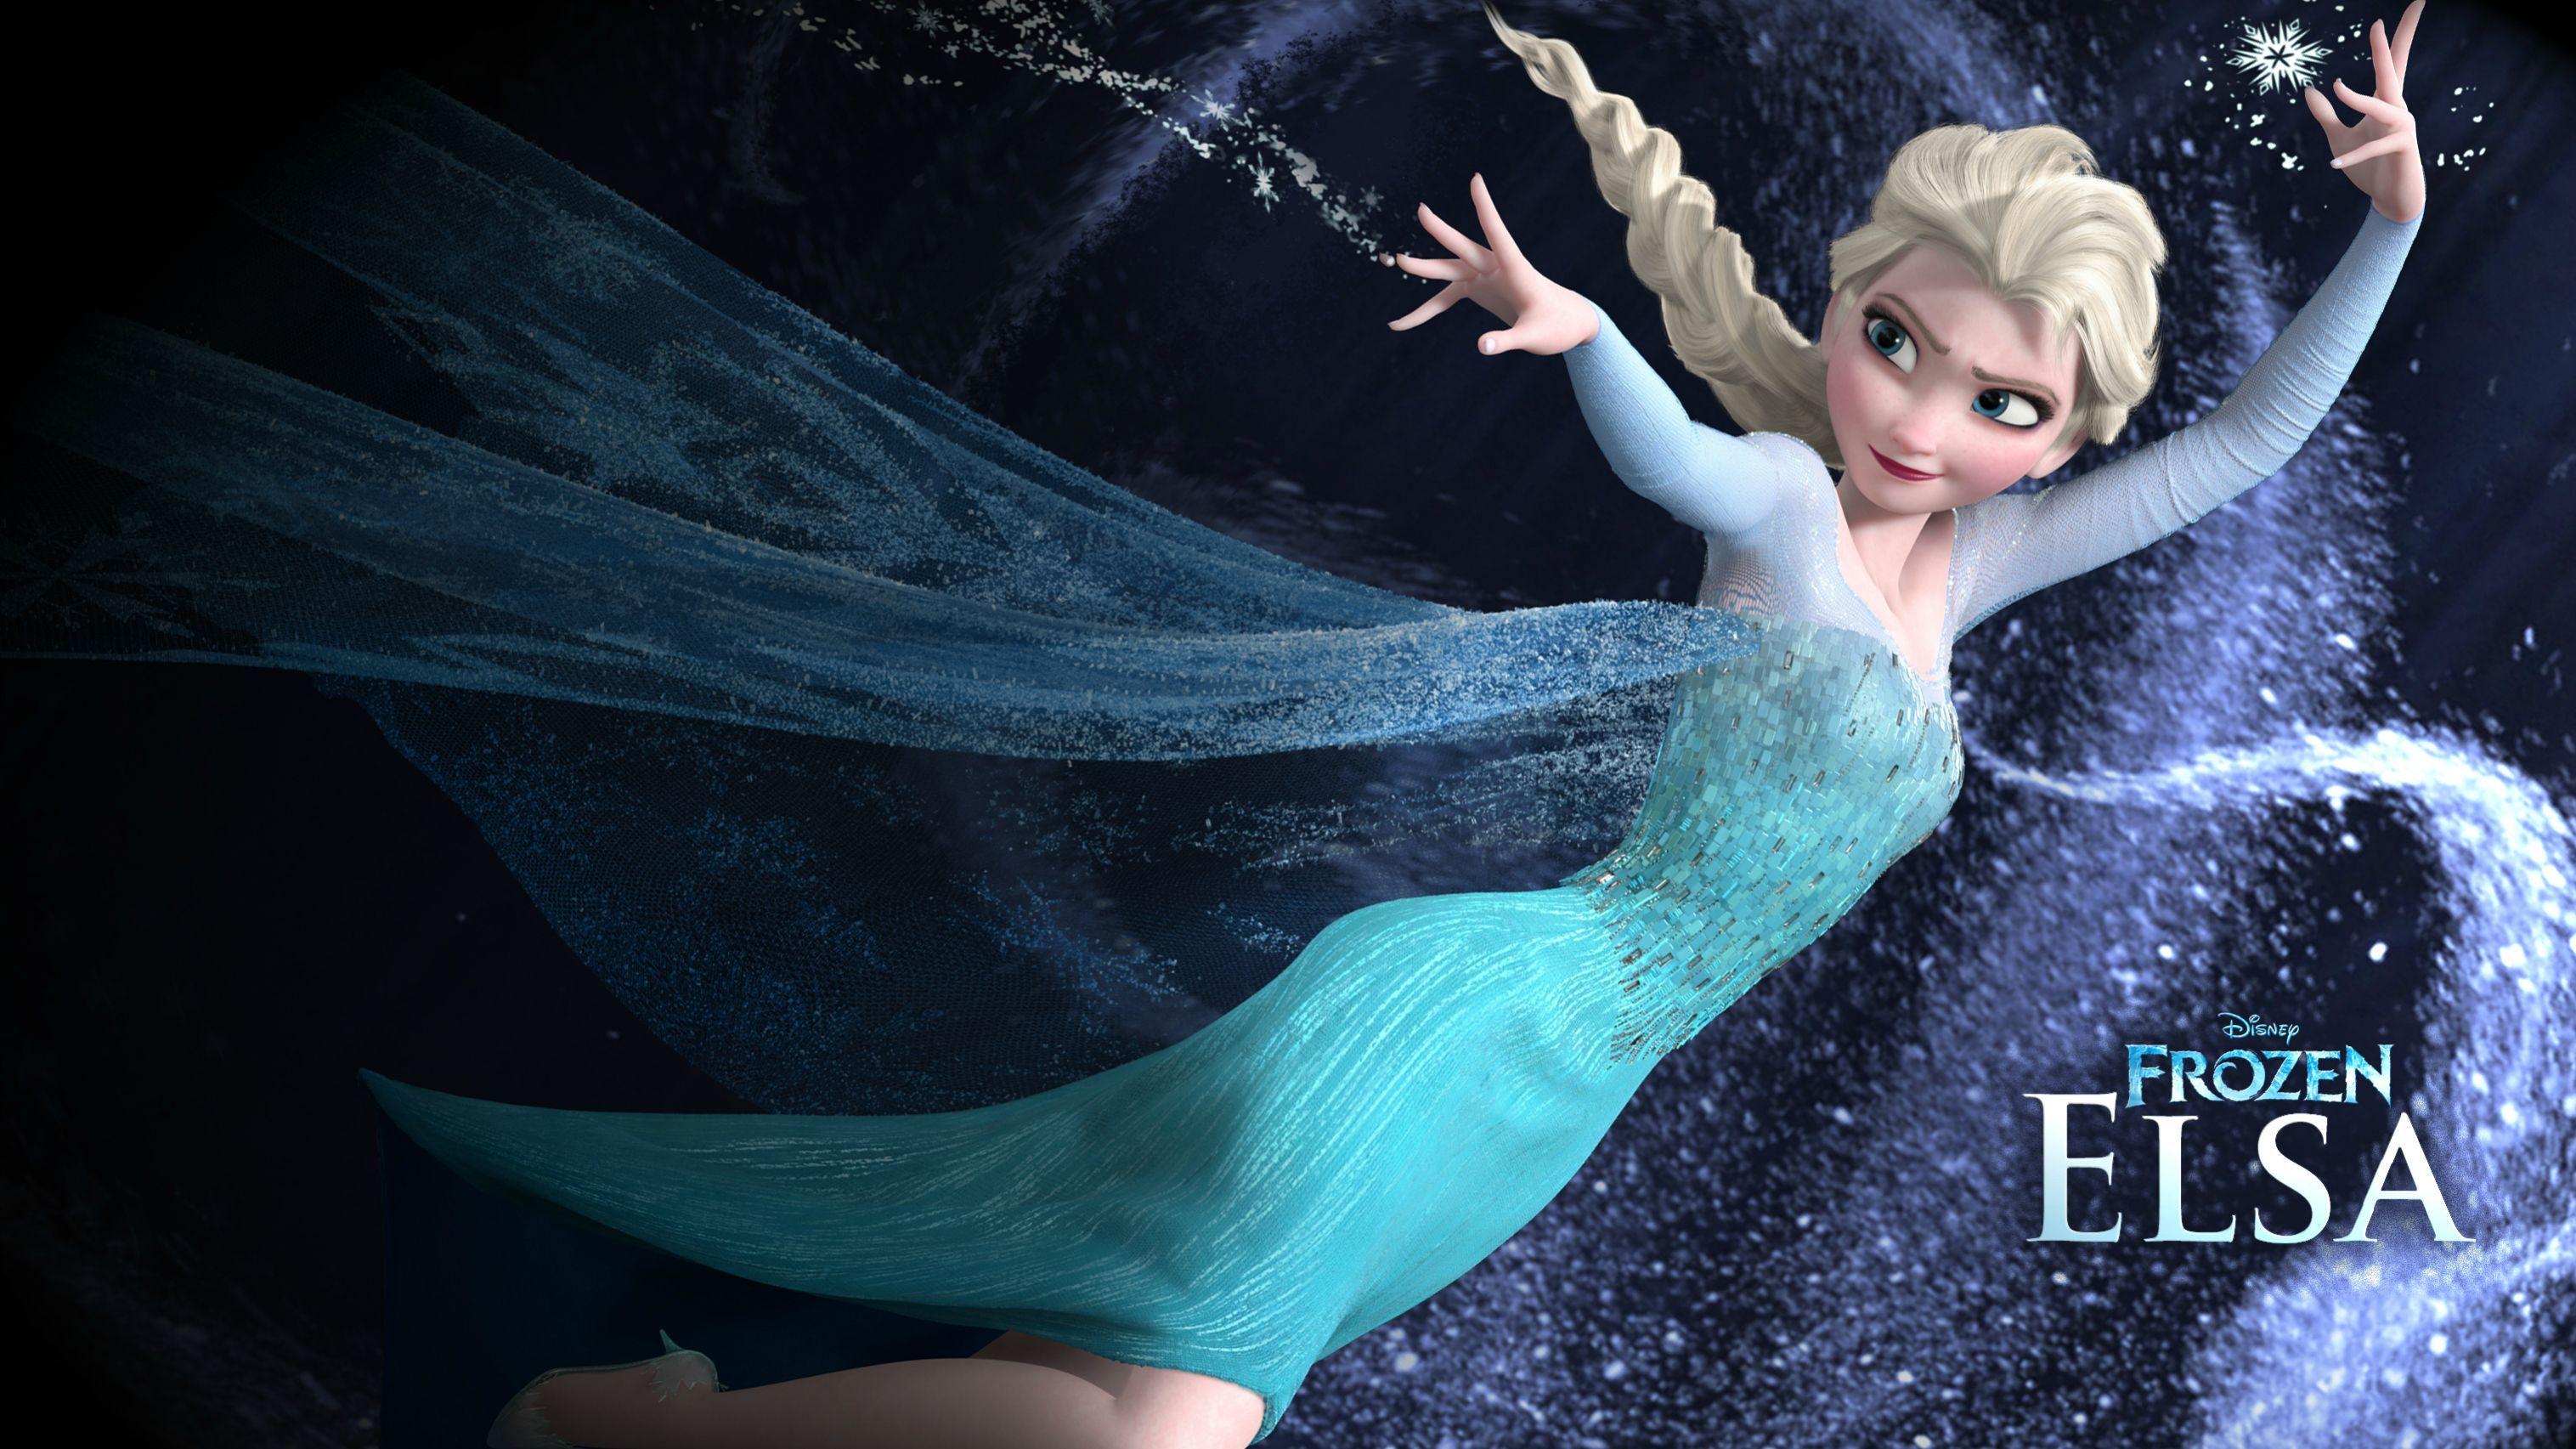 This is the best Elsa 1080p wallpaper I found from Disney's Frozen